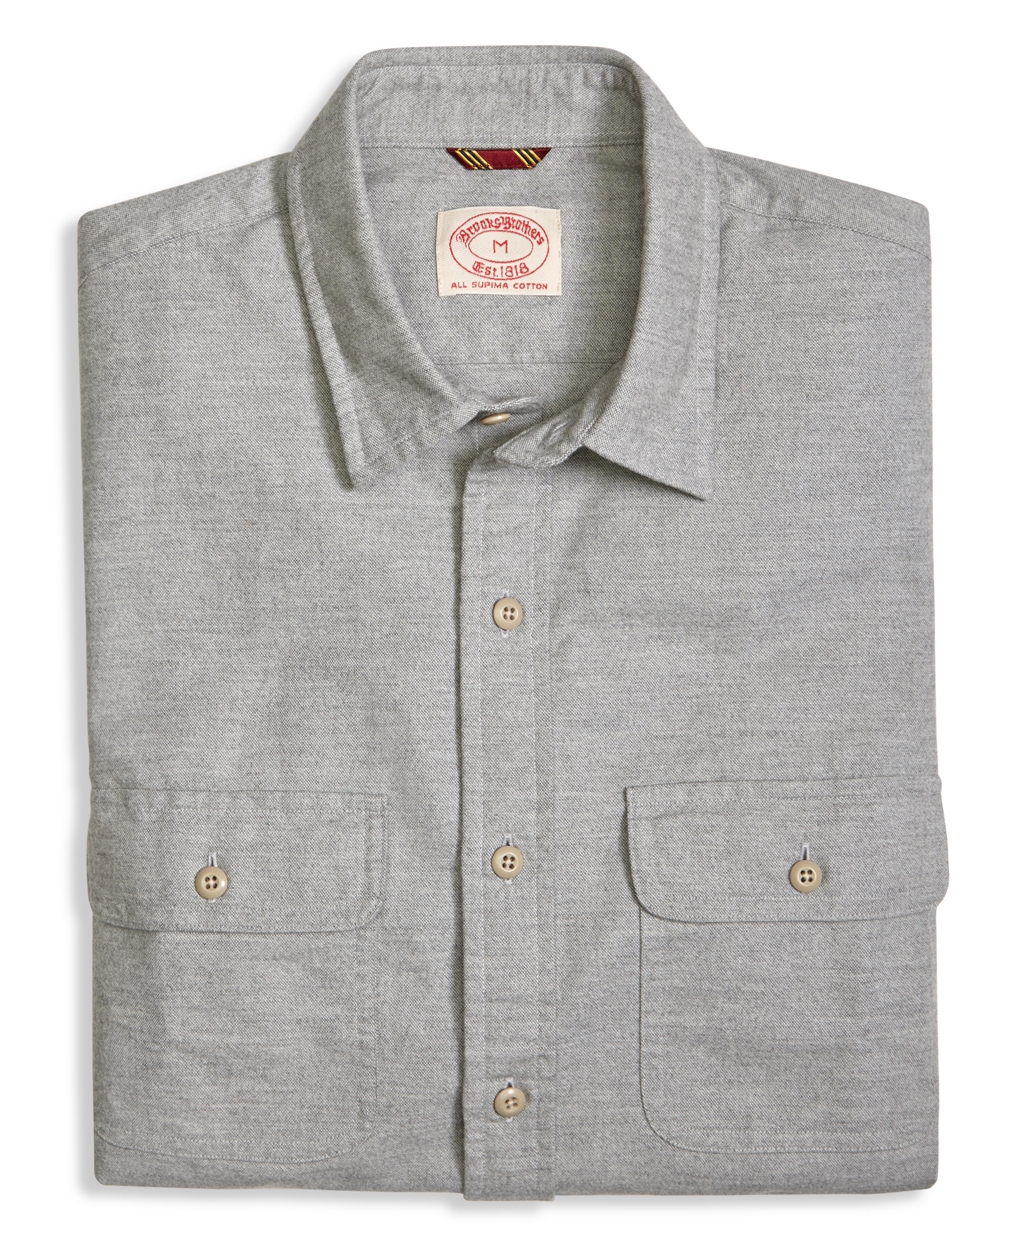 Lyst - Brooks Brothers Solid Heathered Flannel Oxford Sport Shirt in ...